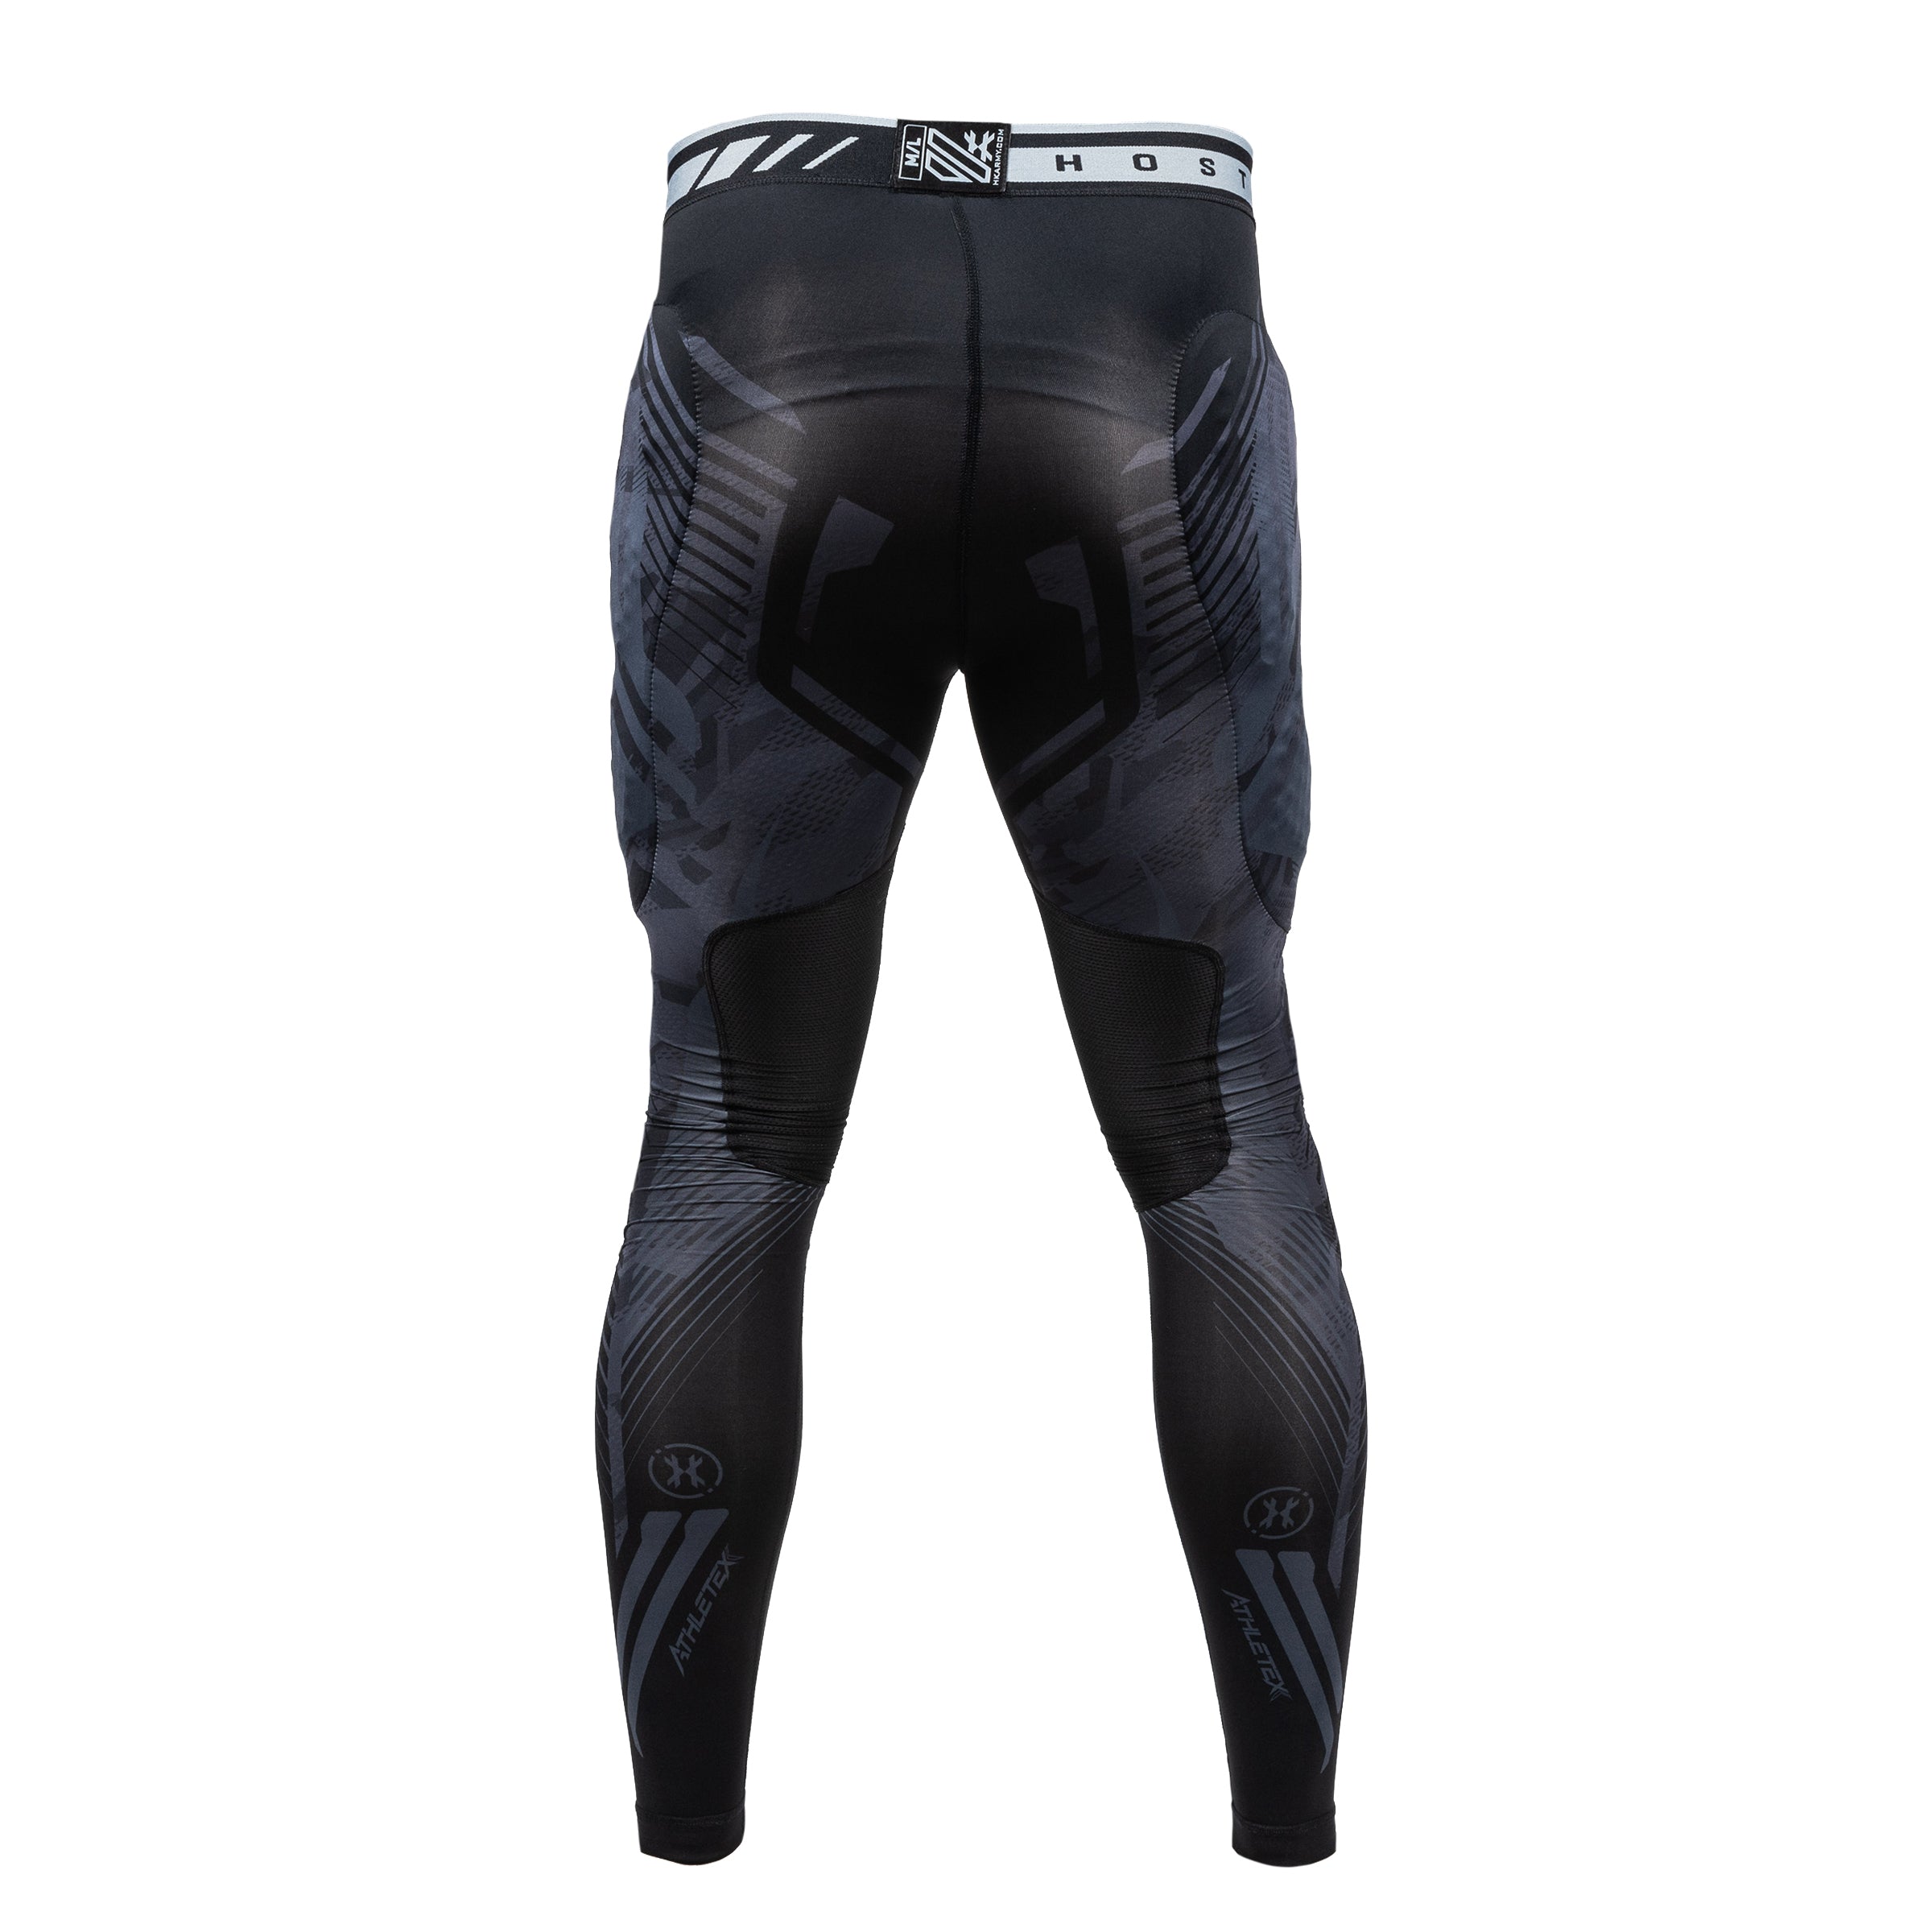 CTX Armored Compression Pants - Full Leg - Eminent Paintball And Airsoft